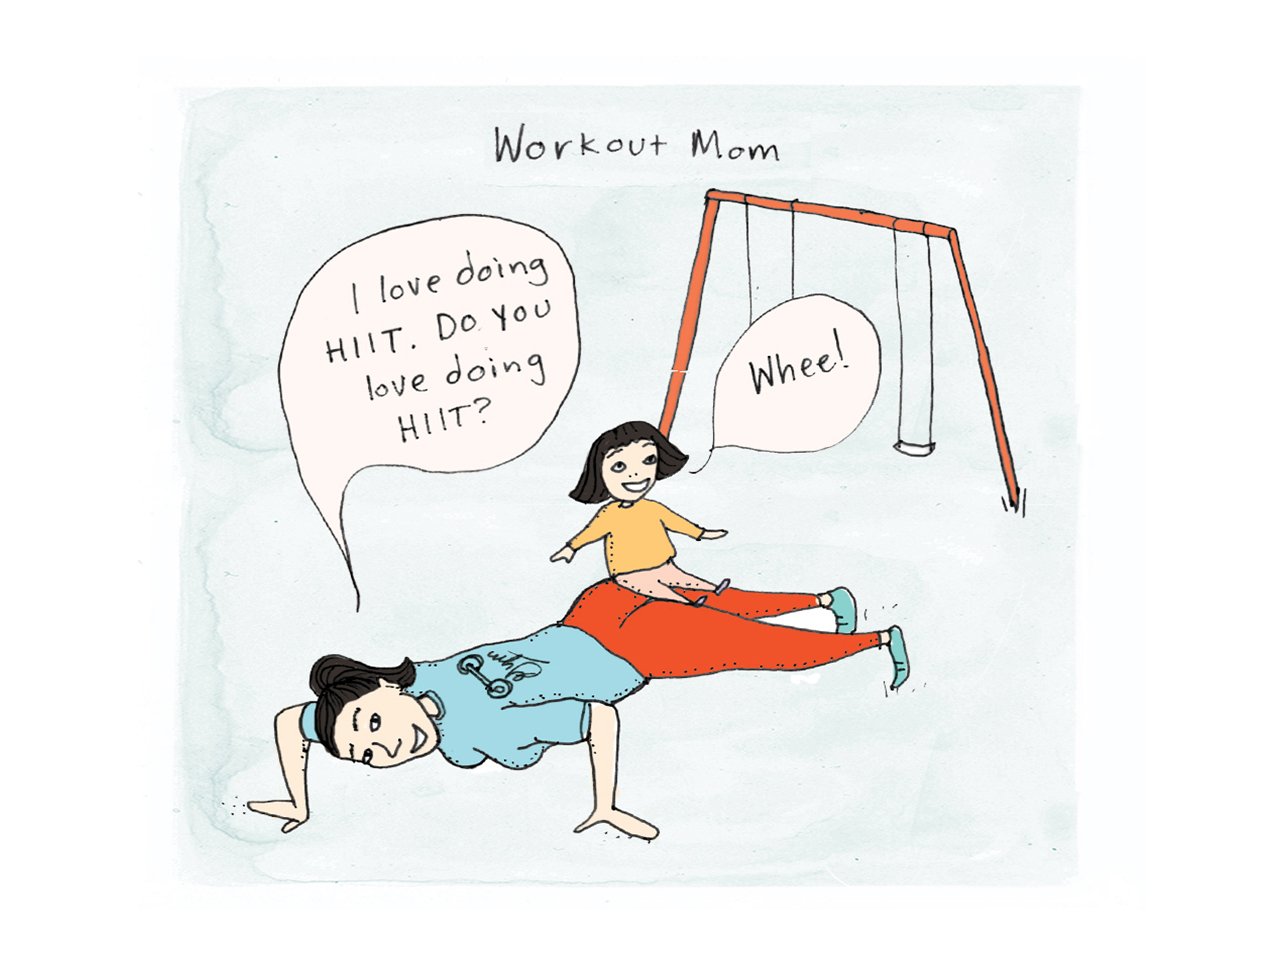 Illustration of mom doing pushups by the swingset with her kid on her back. Caption reads Workout Mom